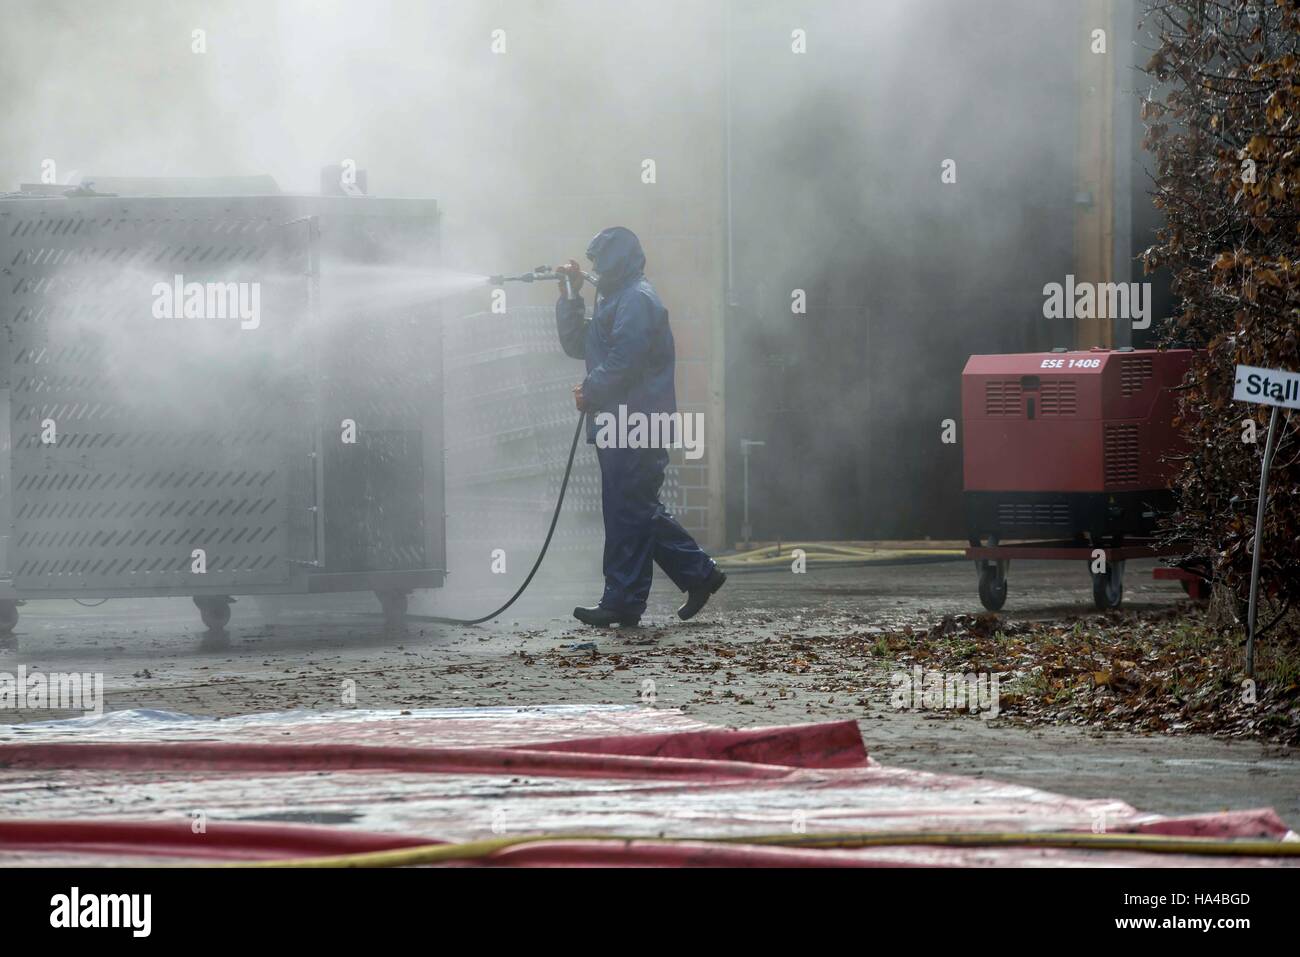 Barssel, Germany. 26th Nov, 2016. A man disinfects the Aurelia-G machine for barn fumigation on the grounds of a farm in Barssel, Germany, 26 November 2016. The highly-contagious bird flu virus H5N8 was detected at the site on 23.11.2016. Photo: Lars Klemmer/dpa/Alamy Live News Stock Photo